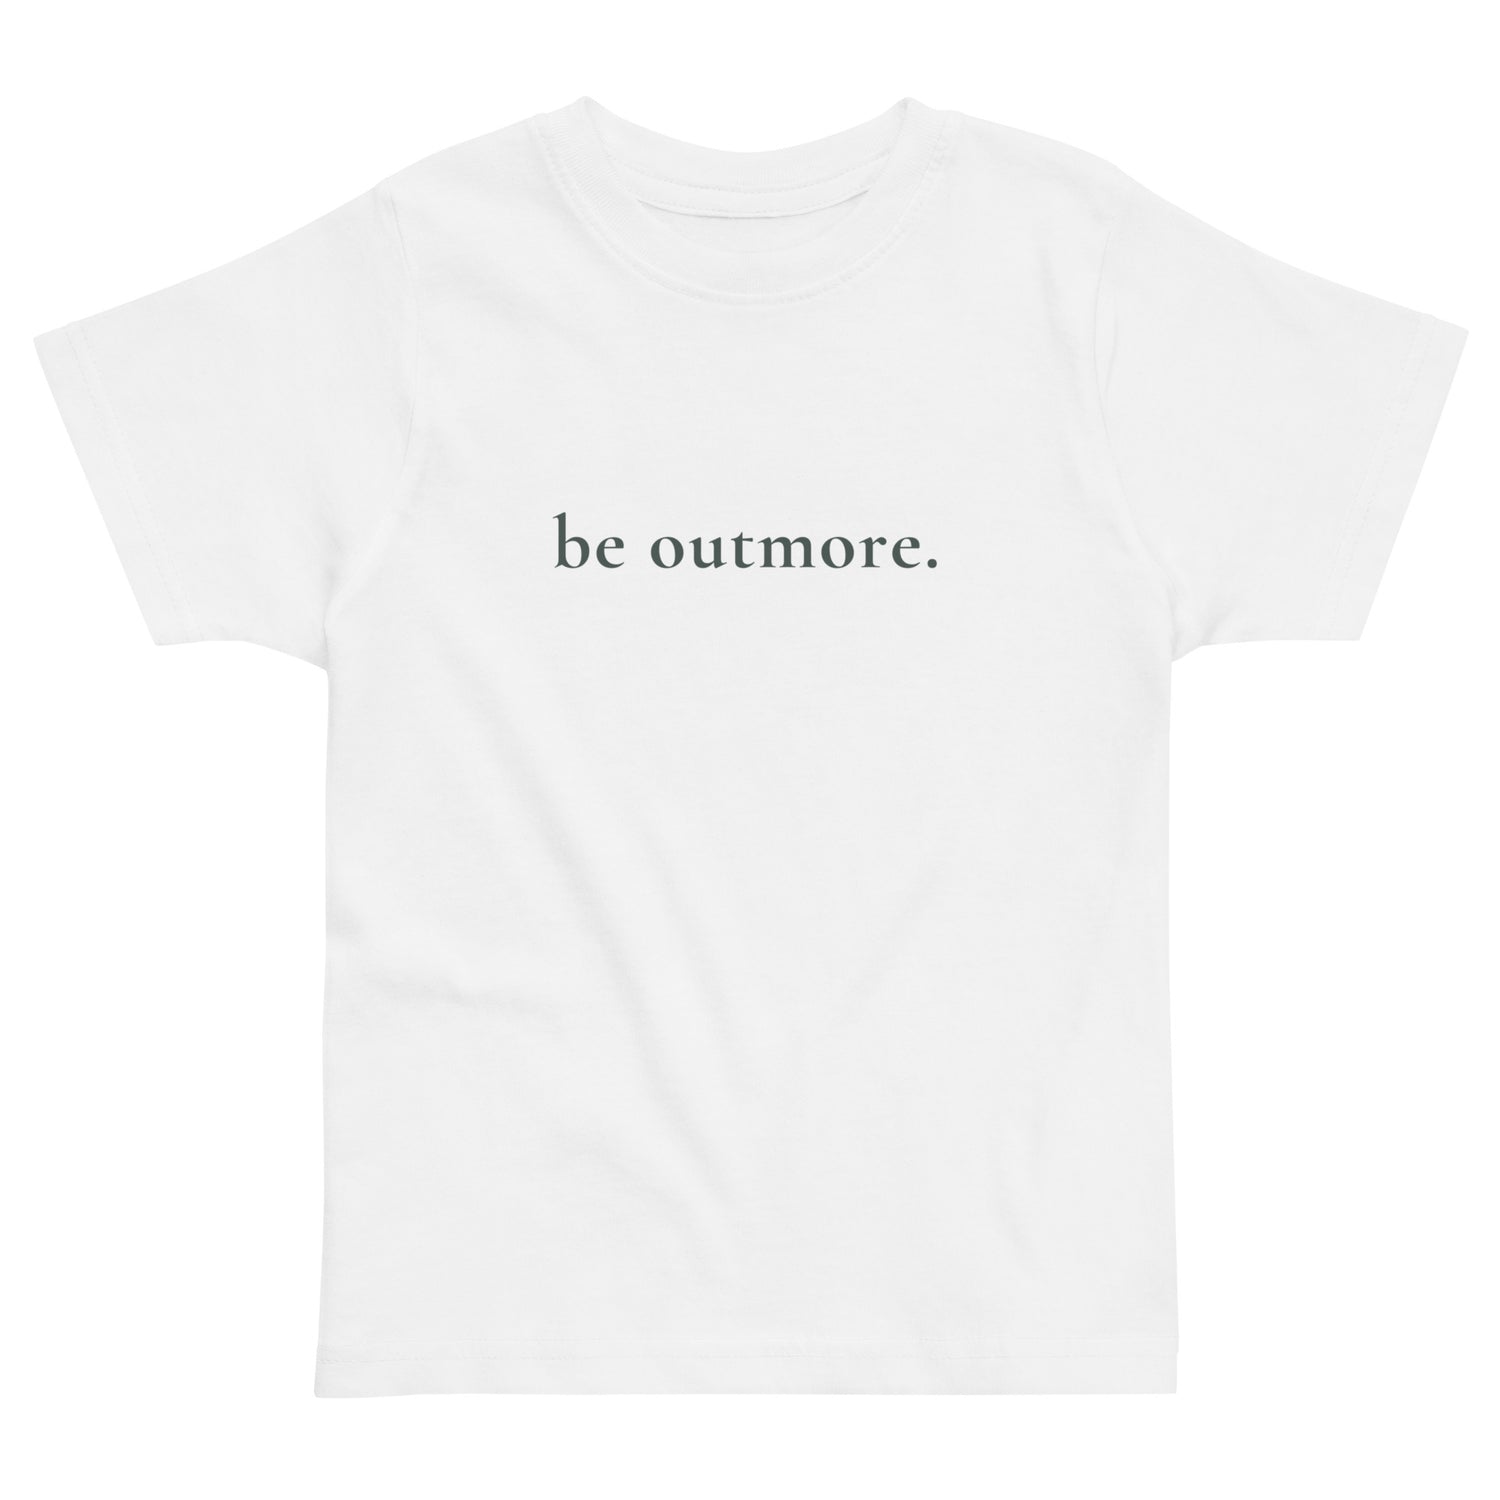 be outmore. Toddler T-Shirt 